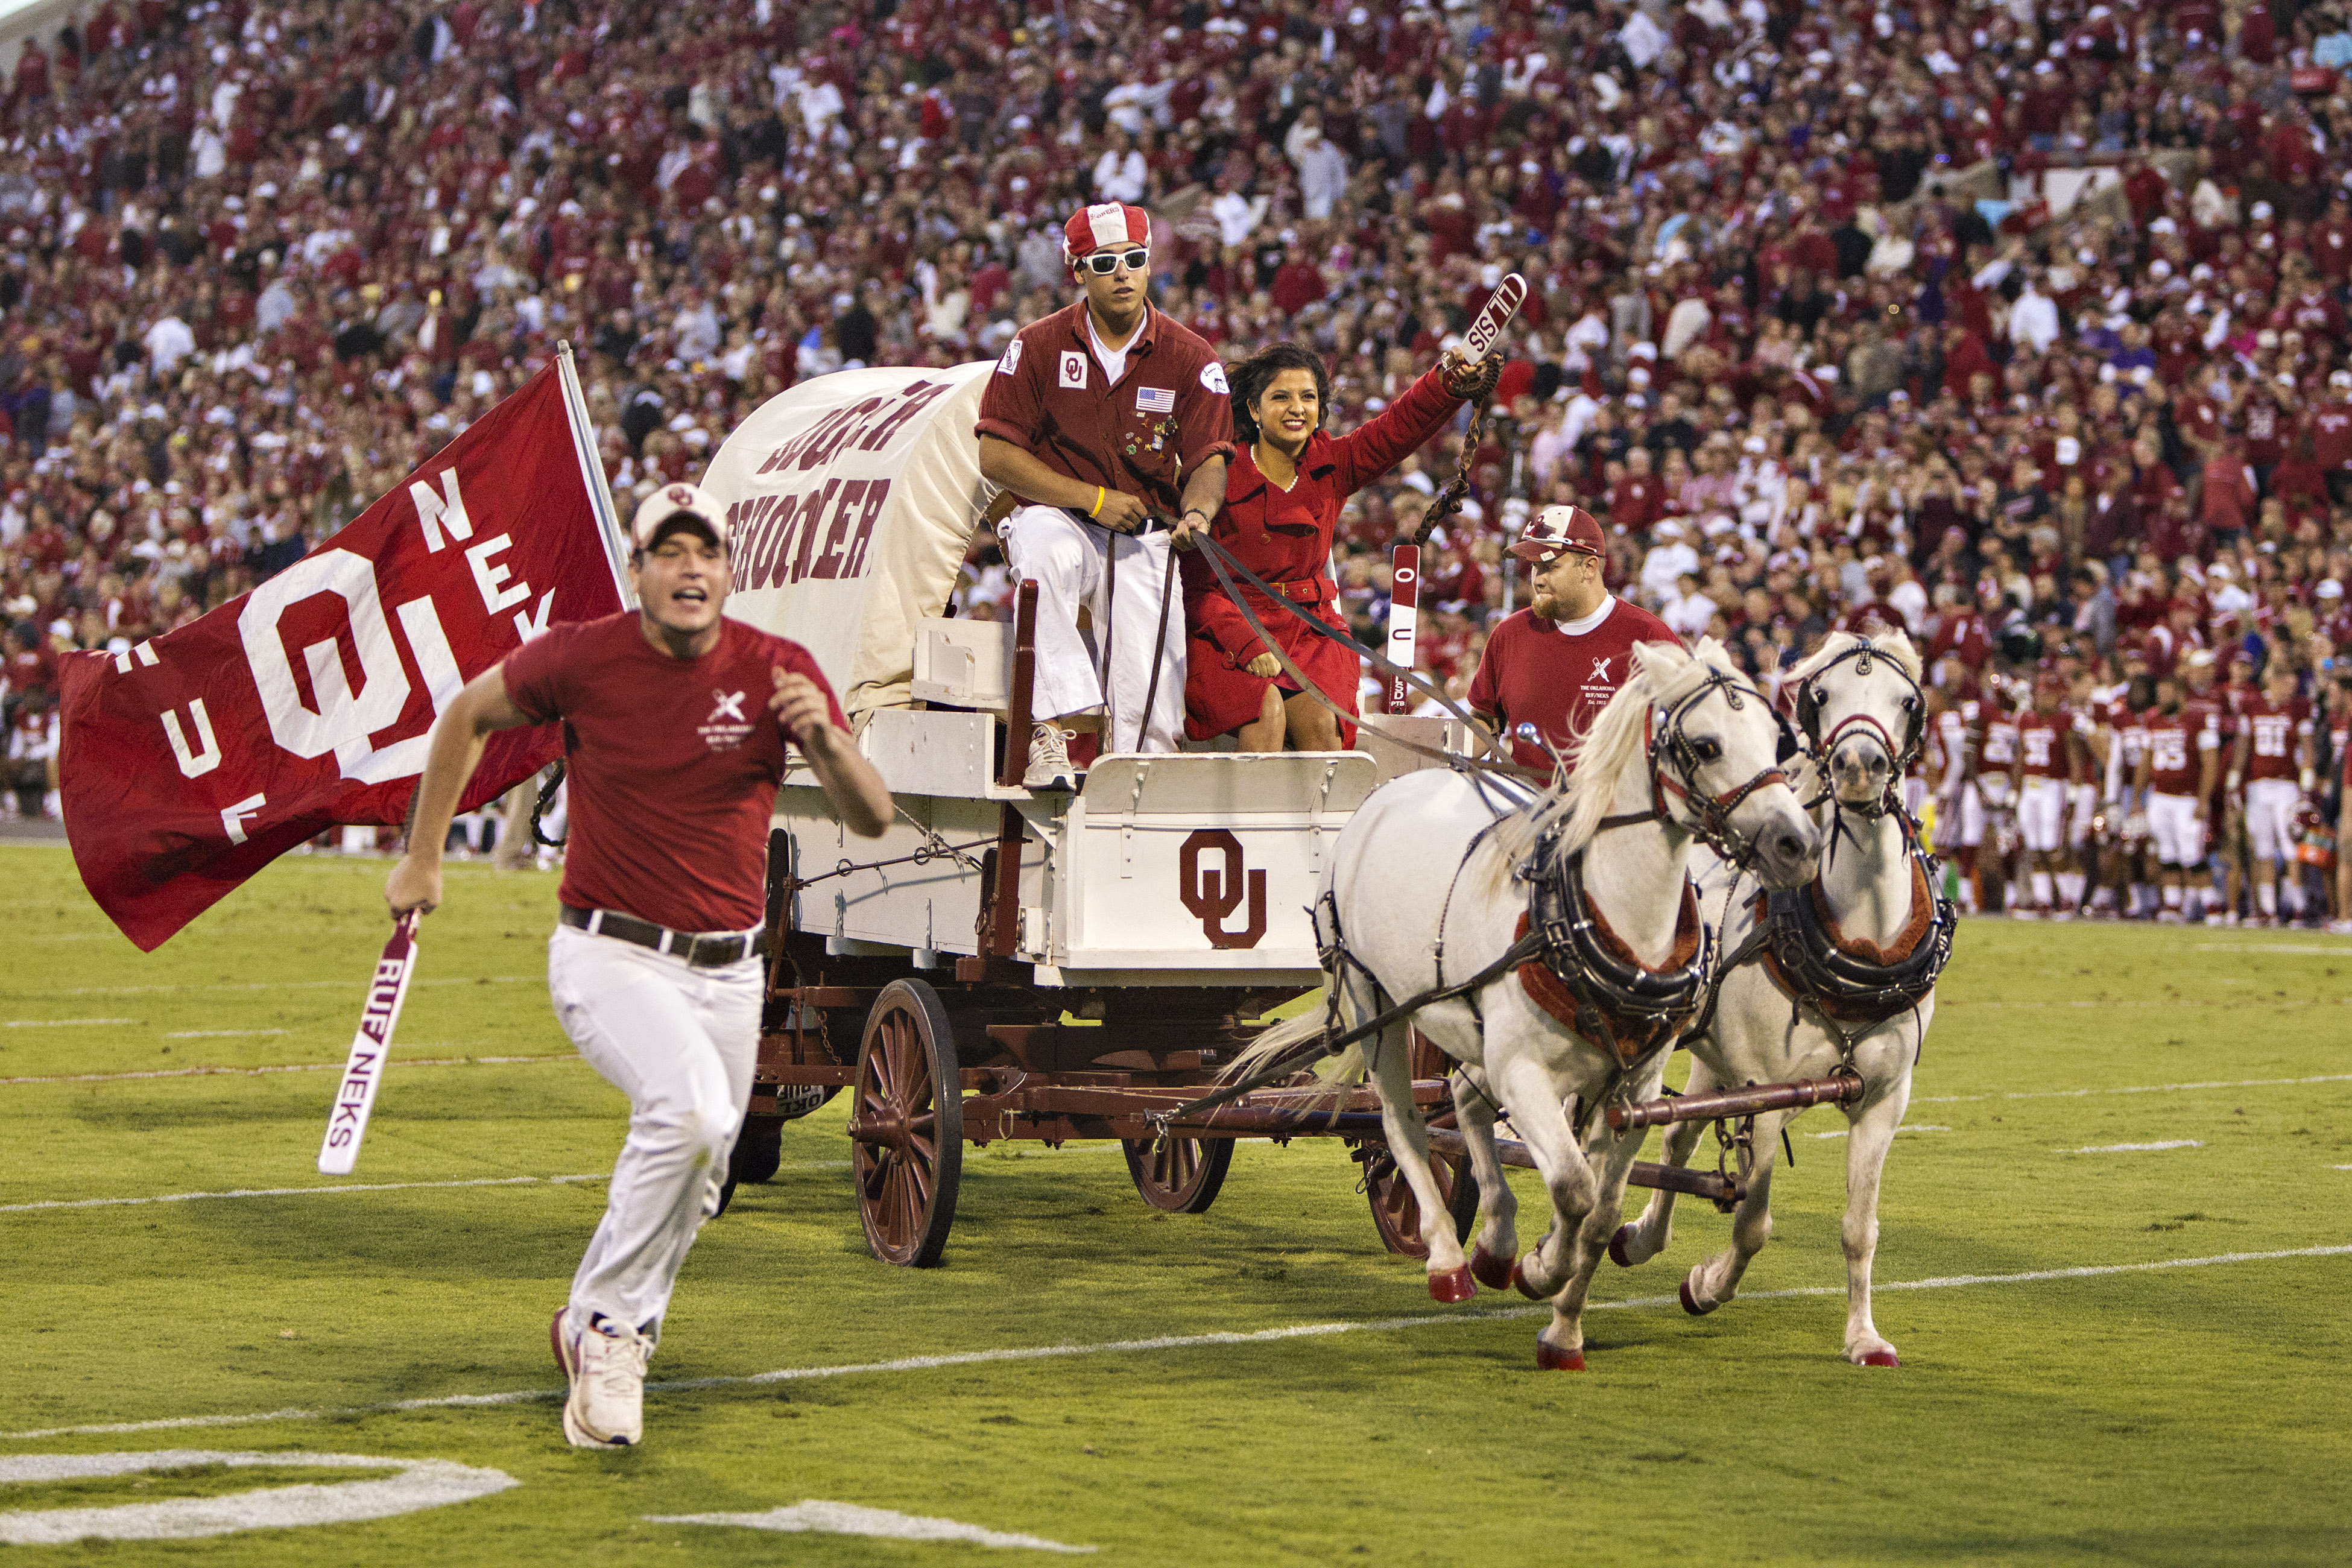 Boomer Sooner of the Oklahoma Sooners rides around the field after a touchdown during a game against the TCU Horned Frogs at Gaylord Family Oklahoma Memorial Stadium in Norman, Okla. on Oct. 5, 2013.